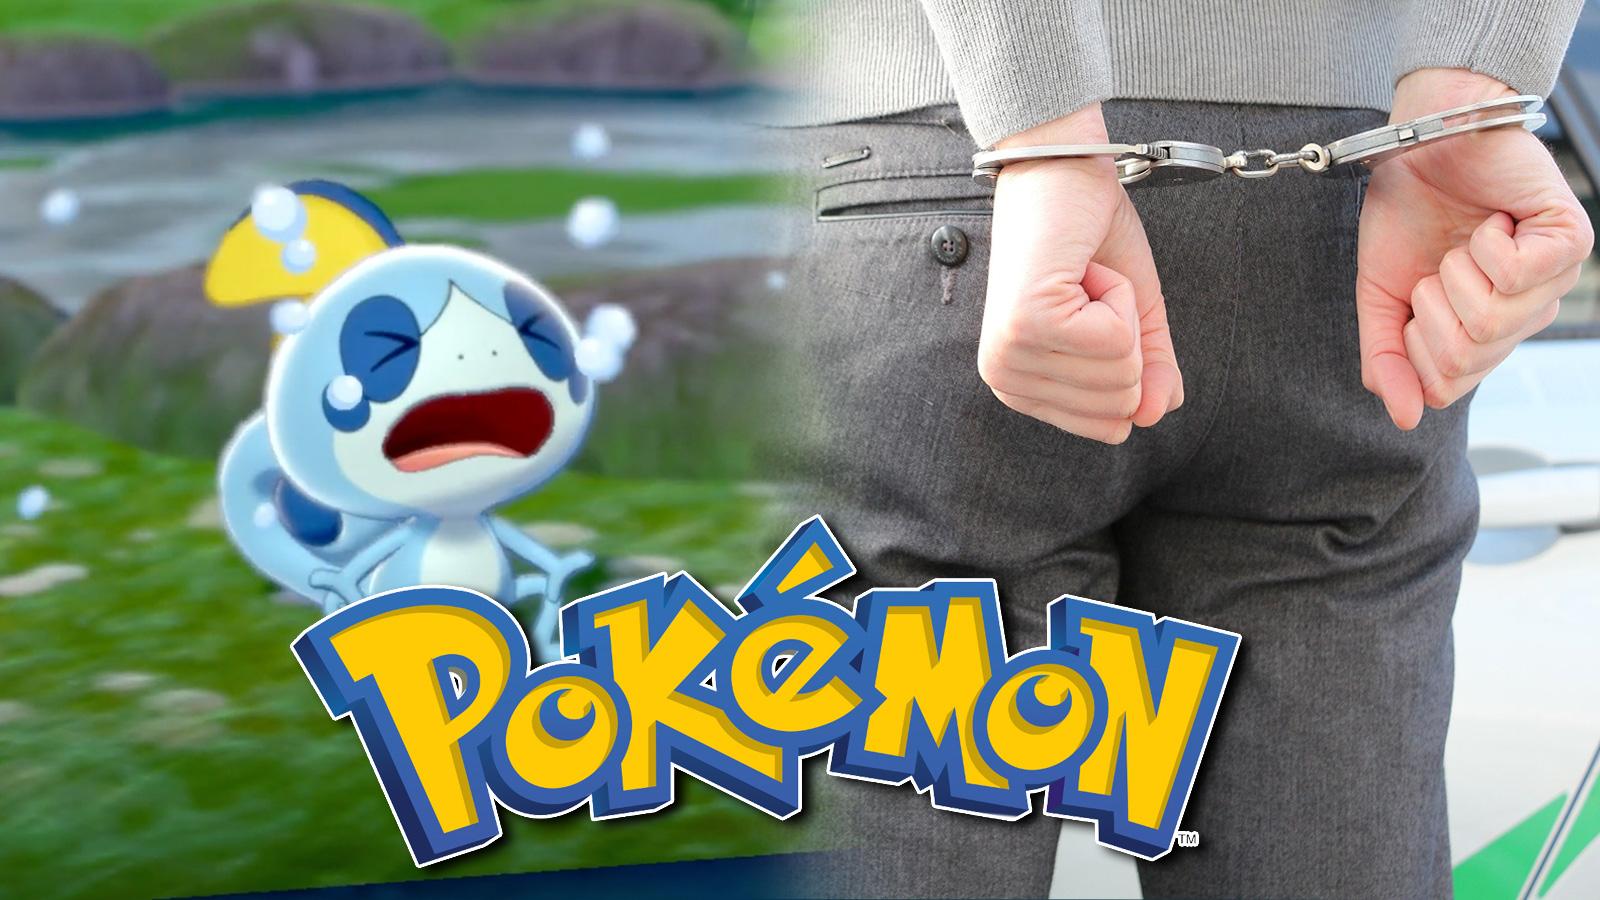 Screenshot of crying Sobble from Pokemon Sword & Shield next to image of man being arrested.